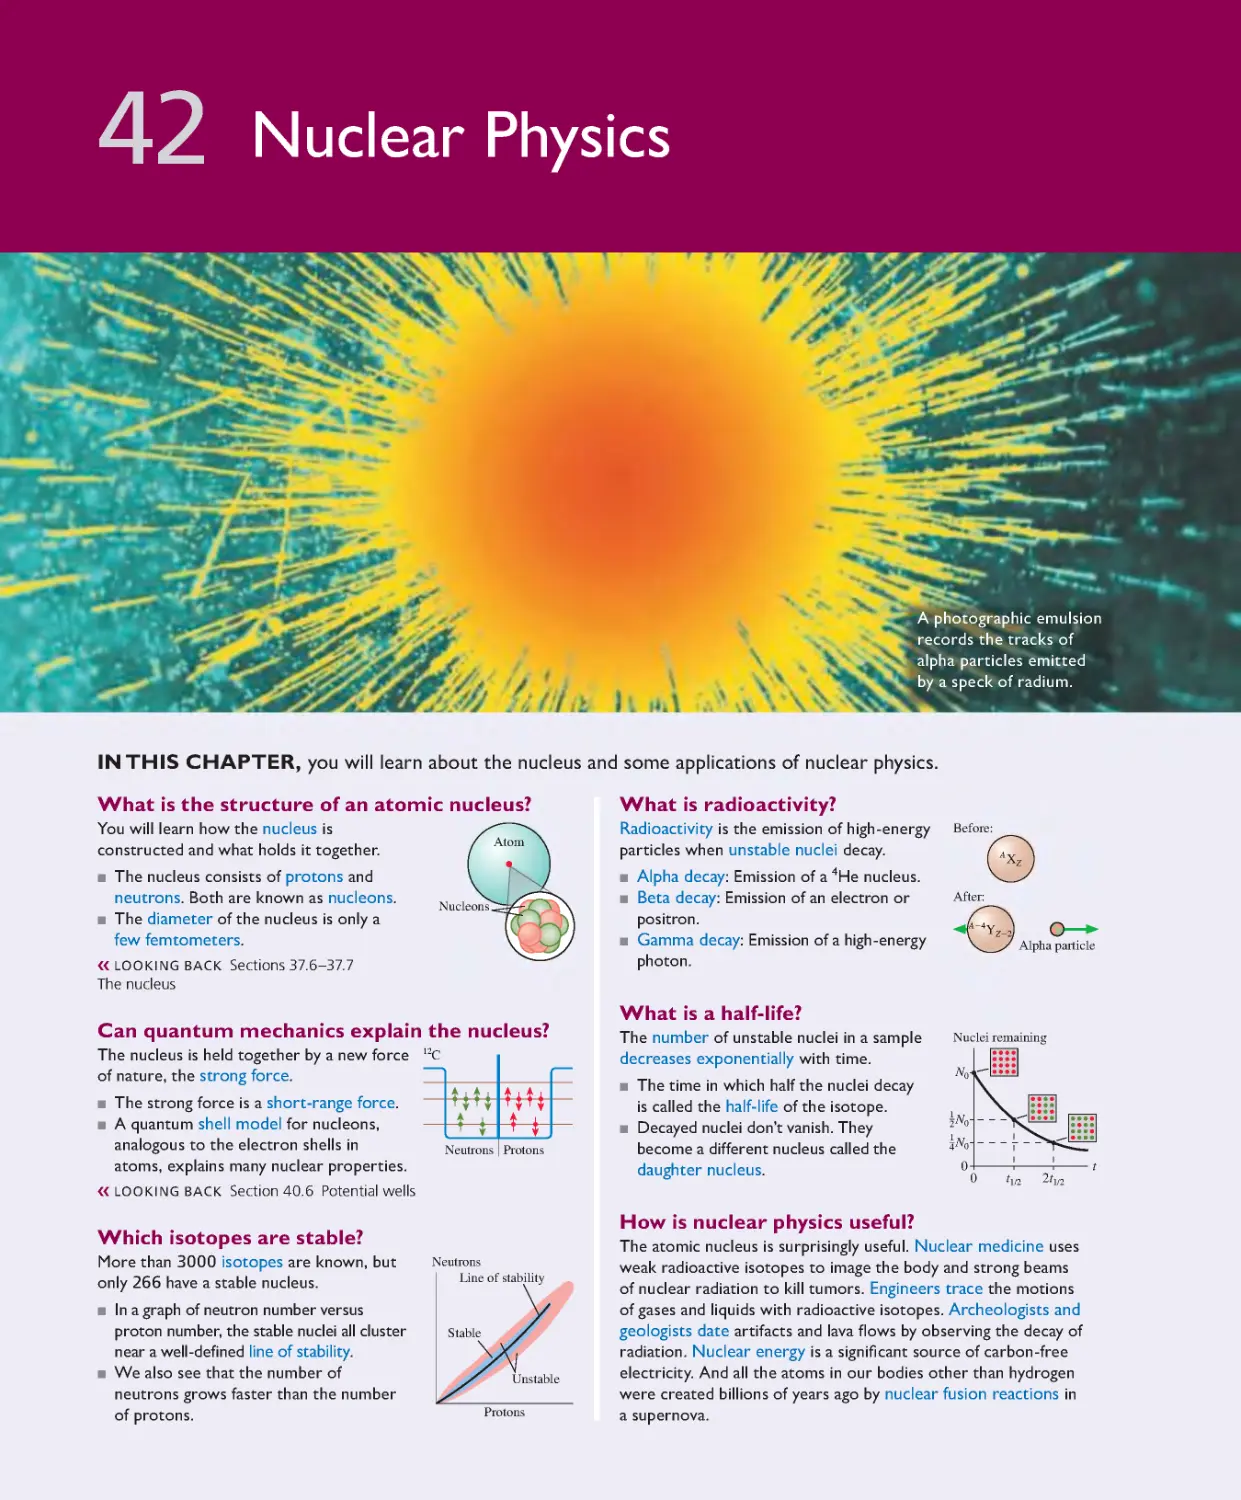 Chapter 42: Nuclear Physics